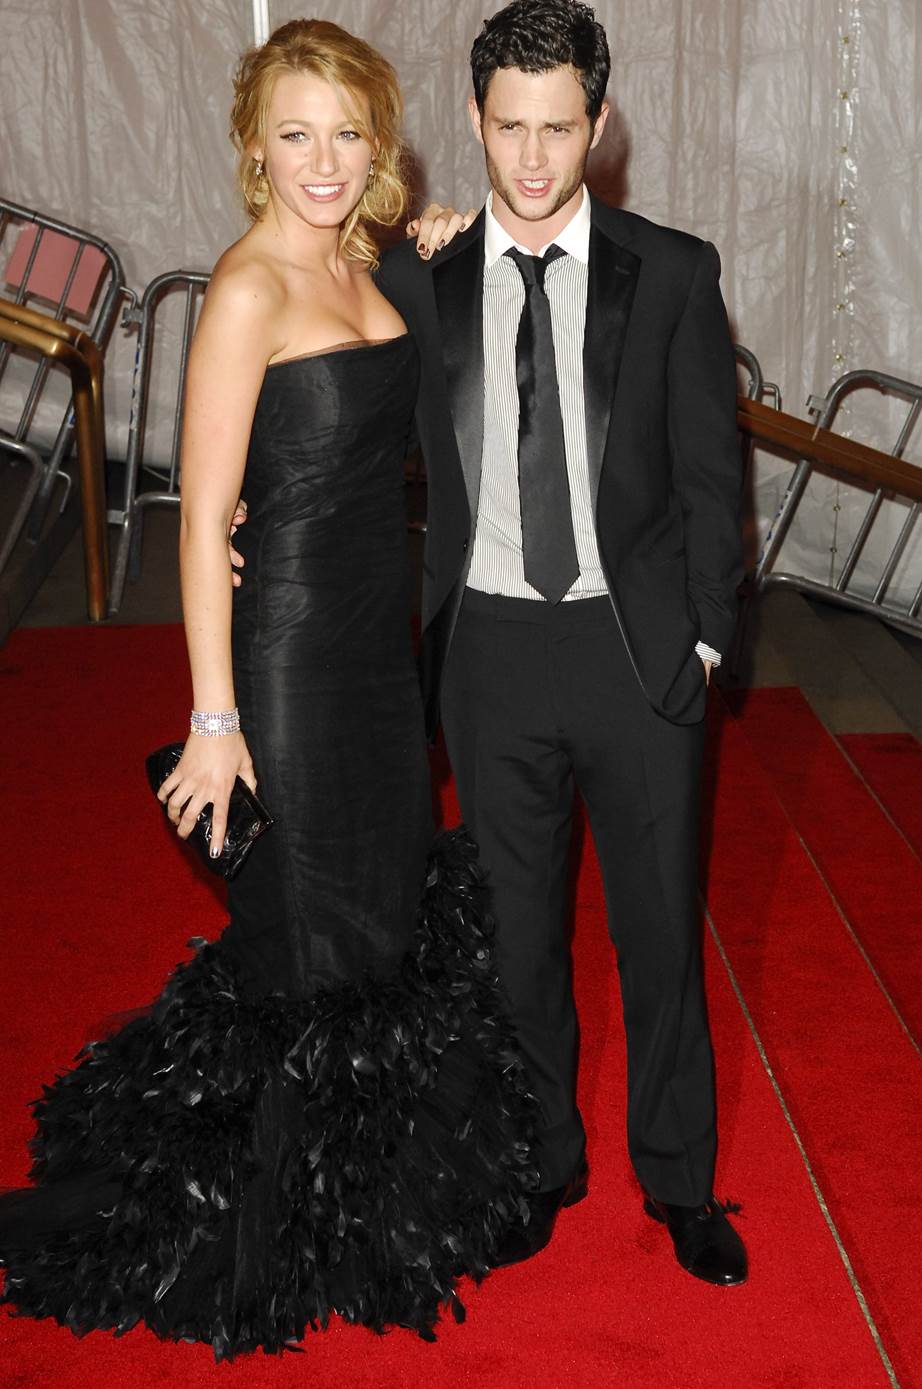 Blake Lively, 2008 Blake Lively wore all American Ralph Lauren to the 2008 Gala, and accessorised with Dan Humphrey. (Sorry, Penn Badgley).